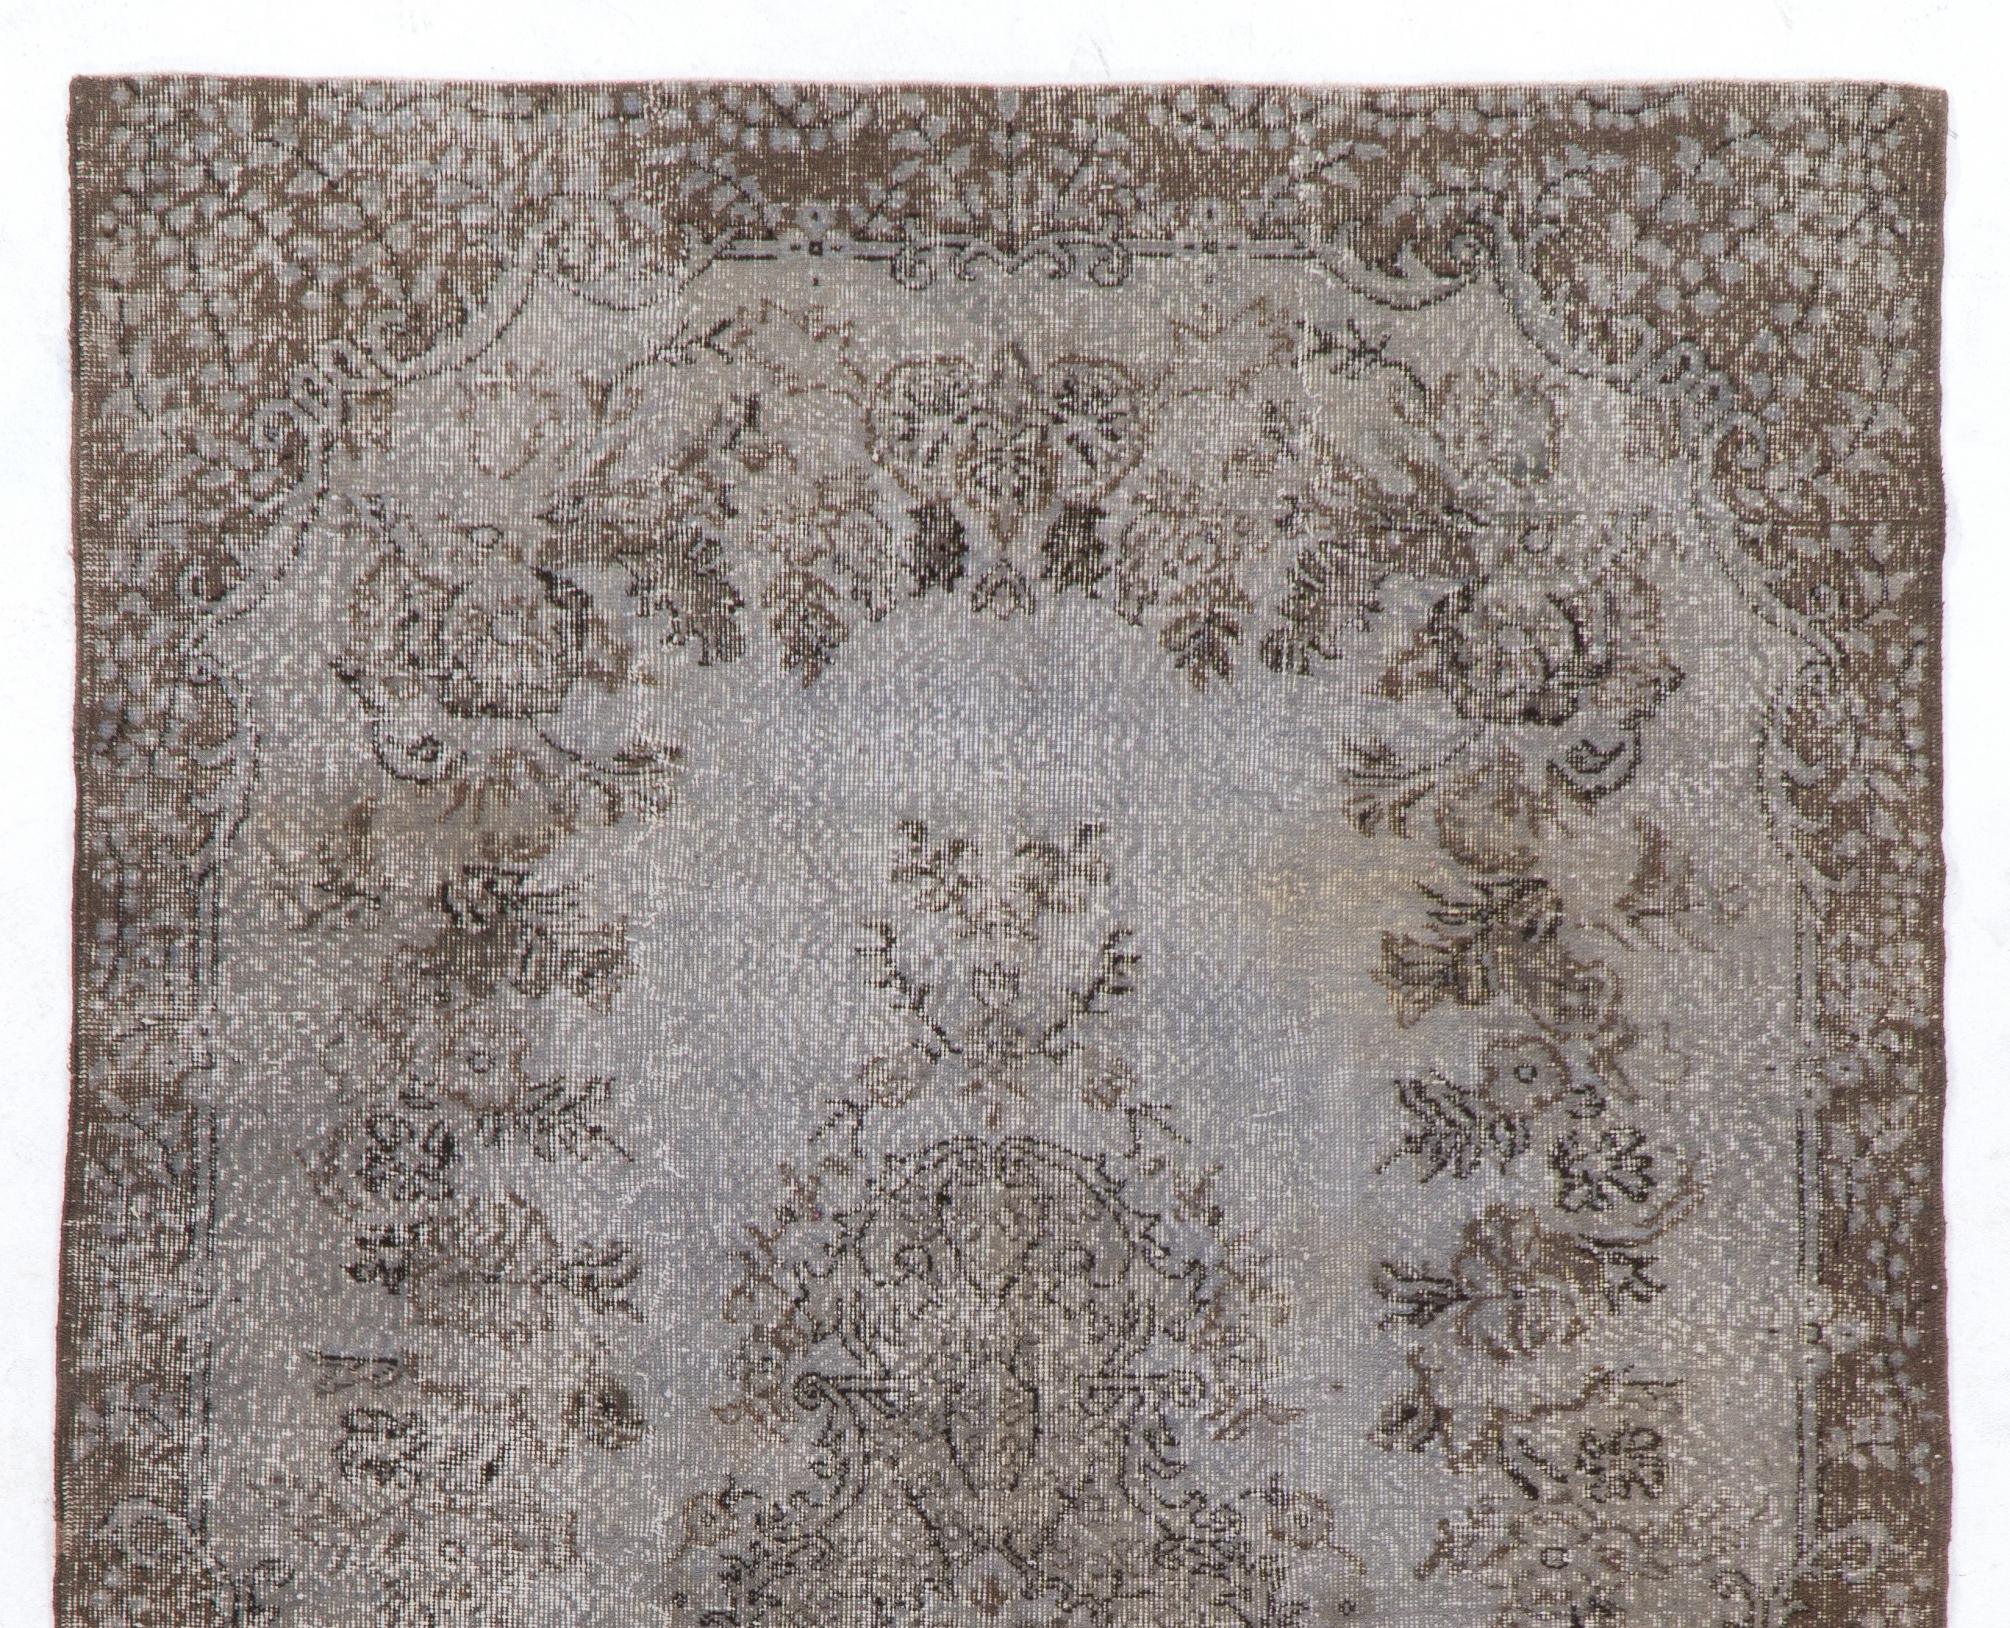 A vintage Turkish area rug re-dyed in gray color. Ideal for both residential and commercial interiors. Measures: 6 x 10 ft.
Finely hand knotted, low wool pile on cotton foundation. Professionally washed.
Sturdy and can be used on a high traffic